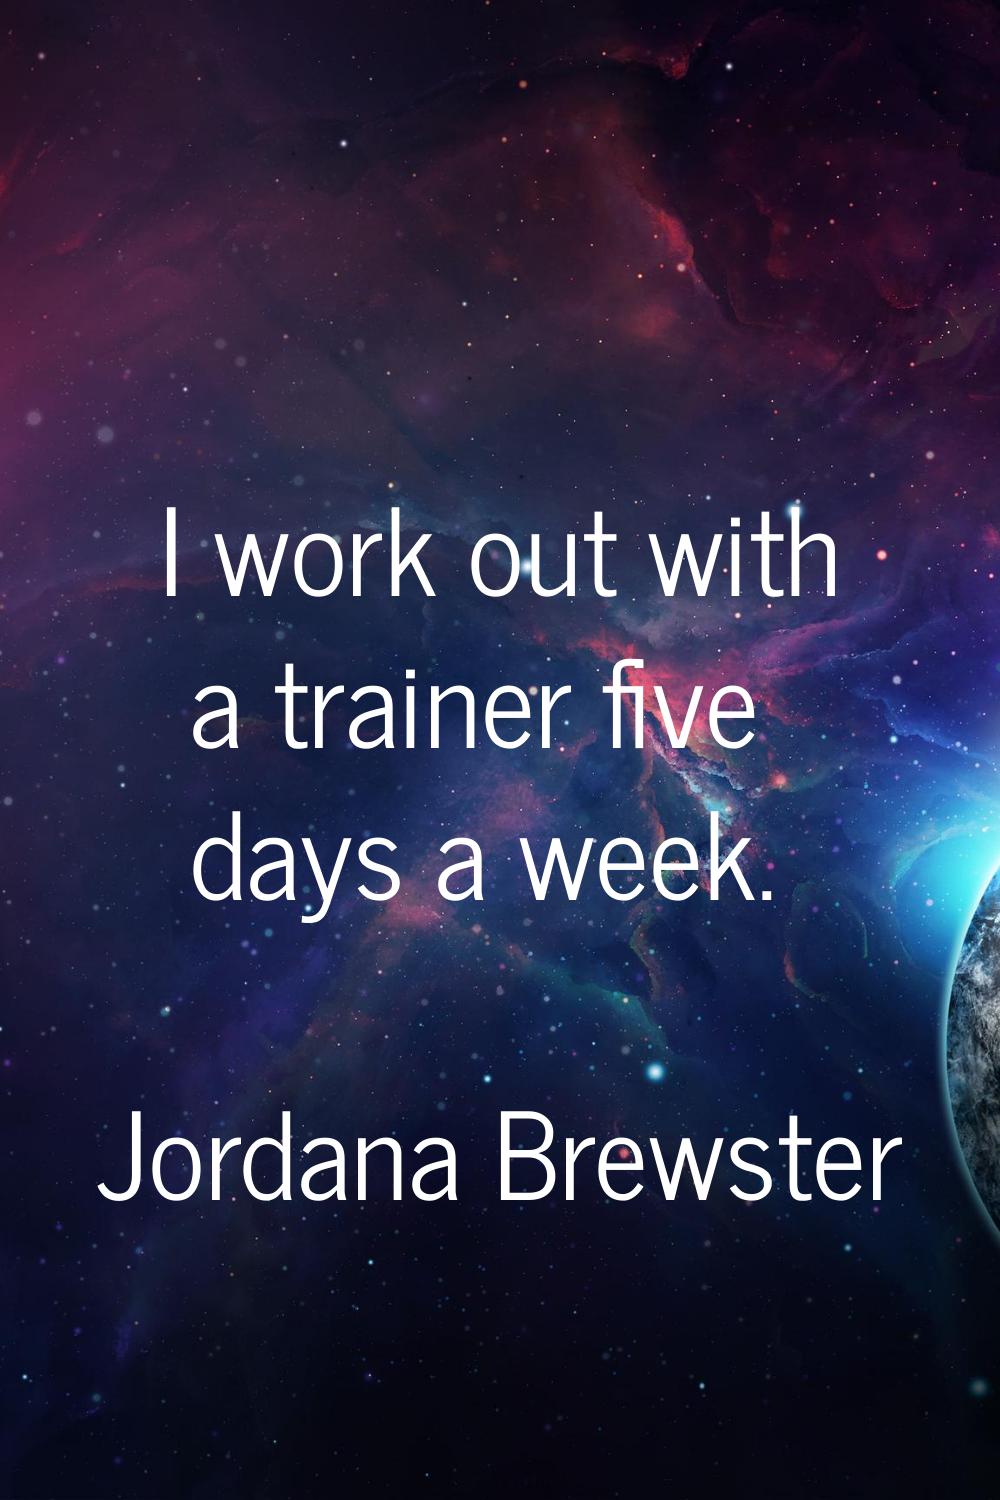 I work out with a trainer five days a week.